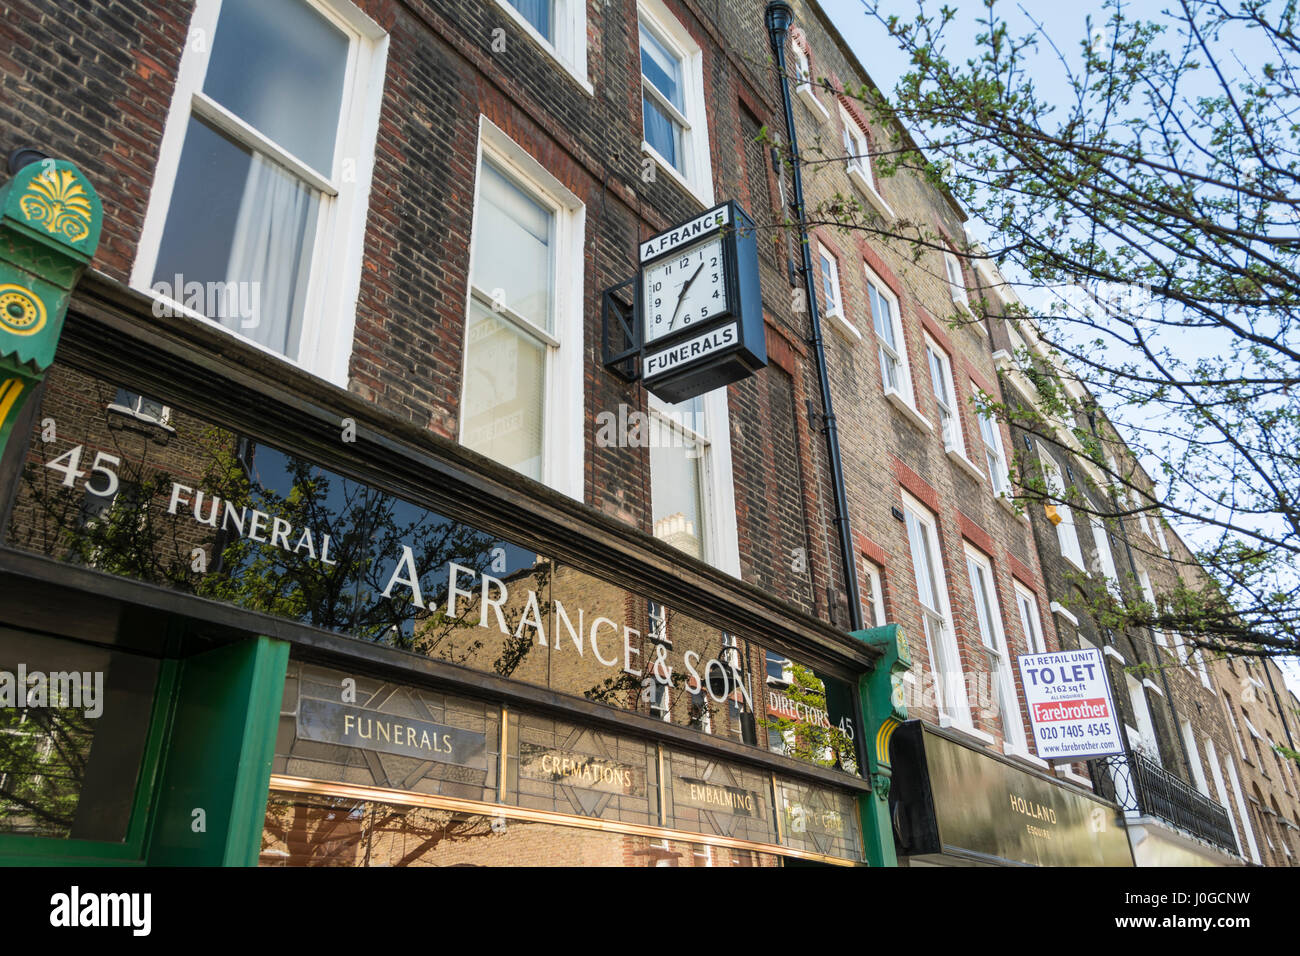 A. France & Son, Funeral Directors on Lamb's Conduit Street in Bloomsbury, London, UK Stock Photo